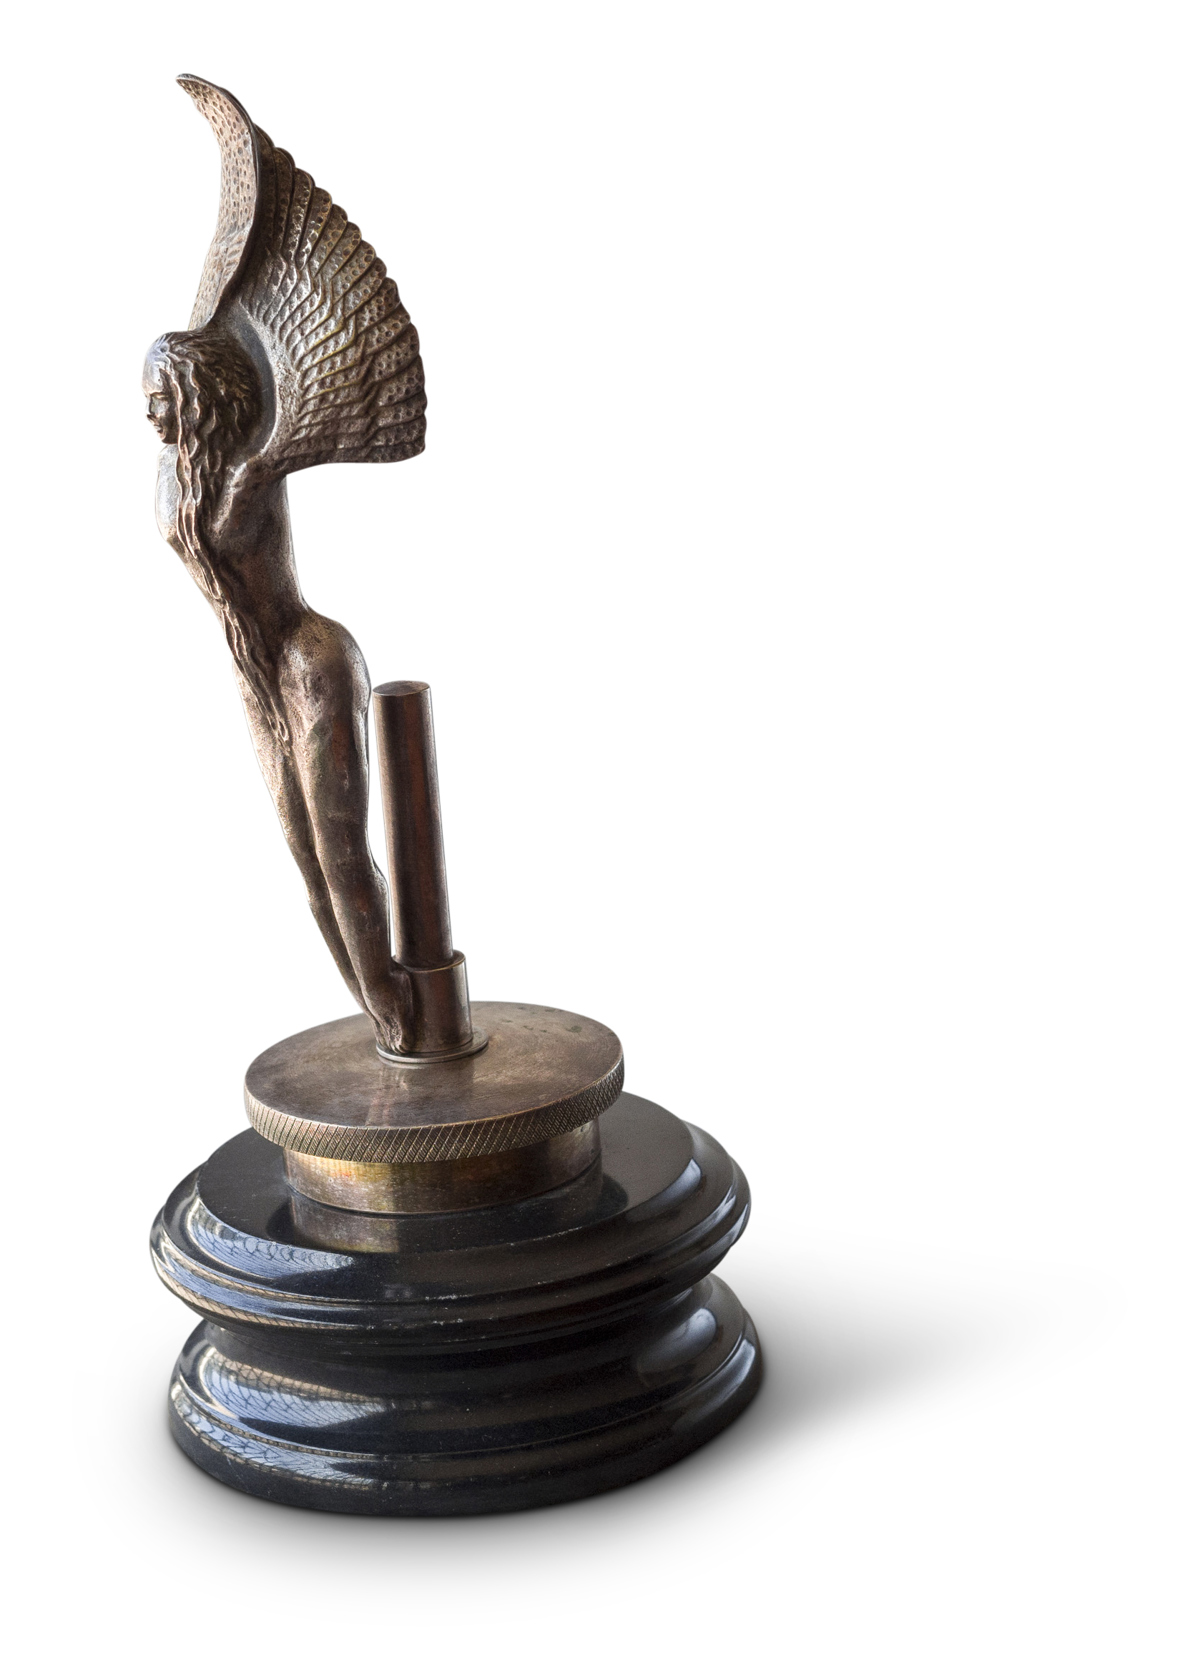 Nude Woman Mascot with Temperature Gauge ca. late-1920s offered at RM Sotheby's The Mitosinka Collection online auction 2020